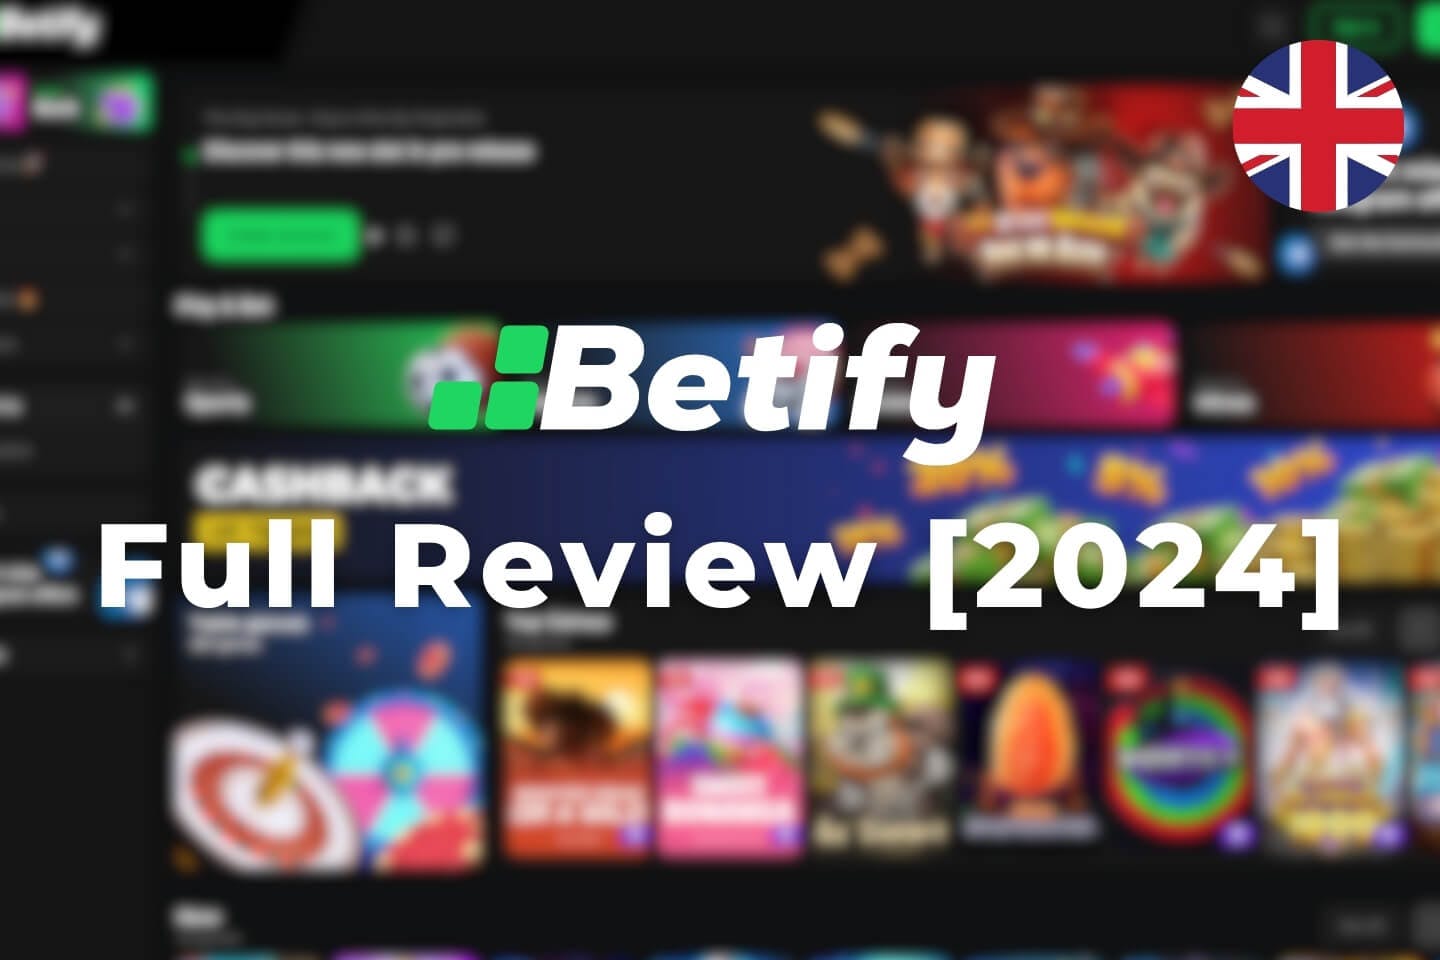 Our review of Betify